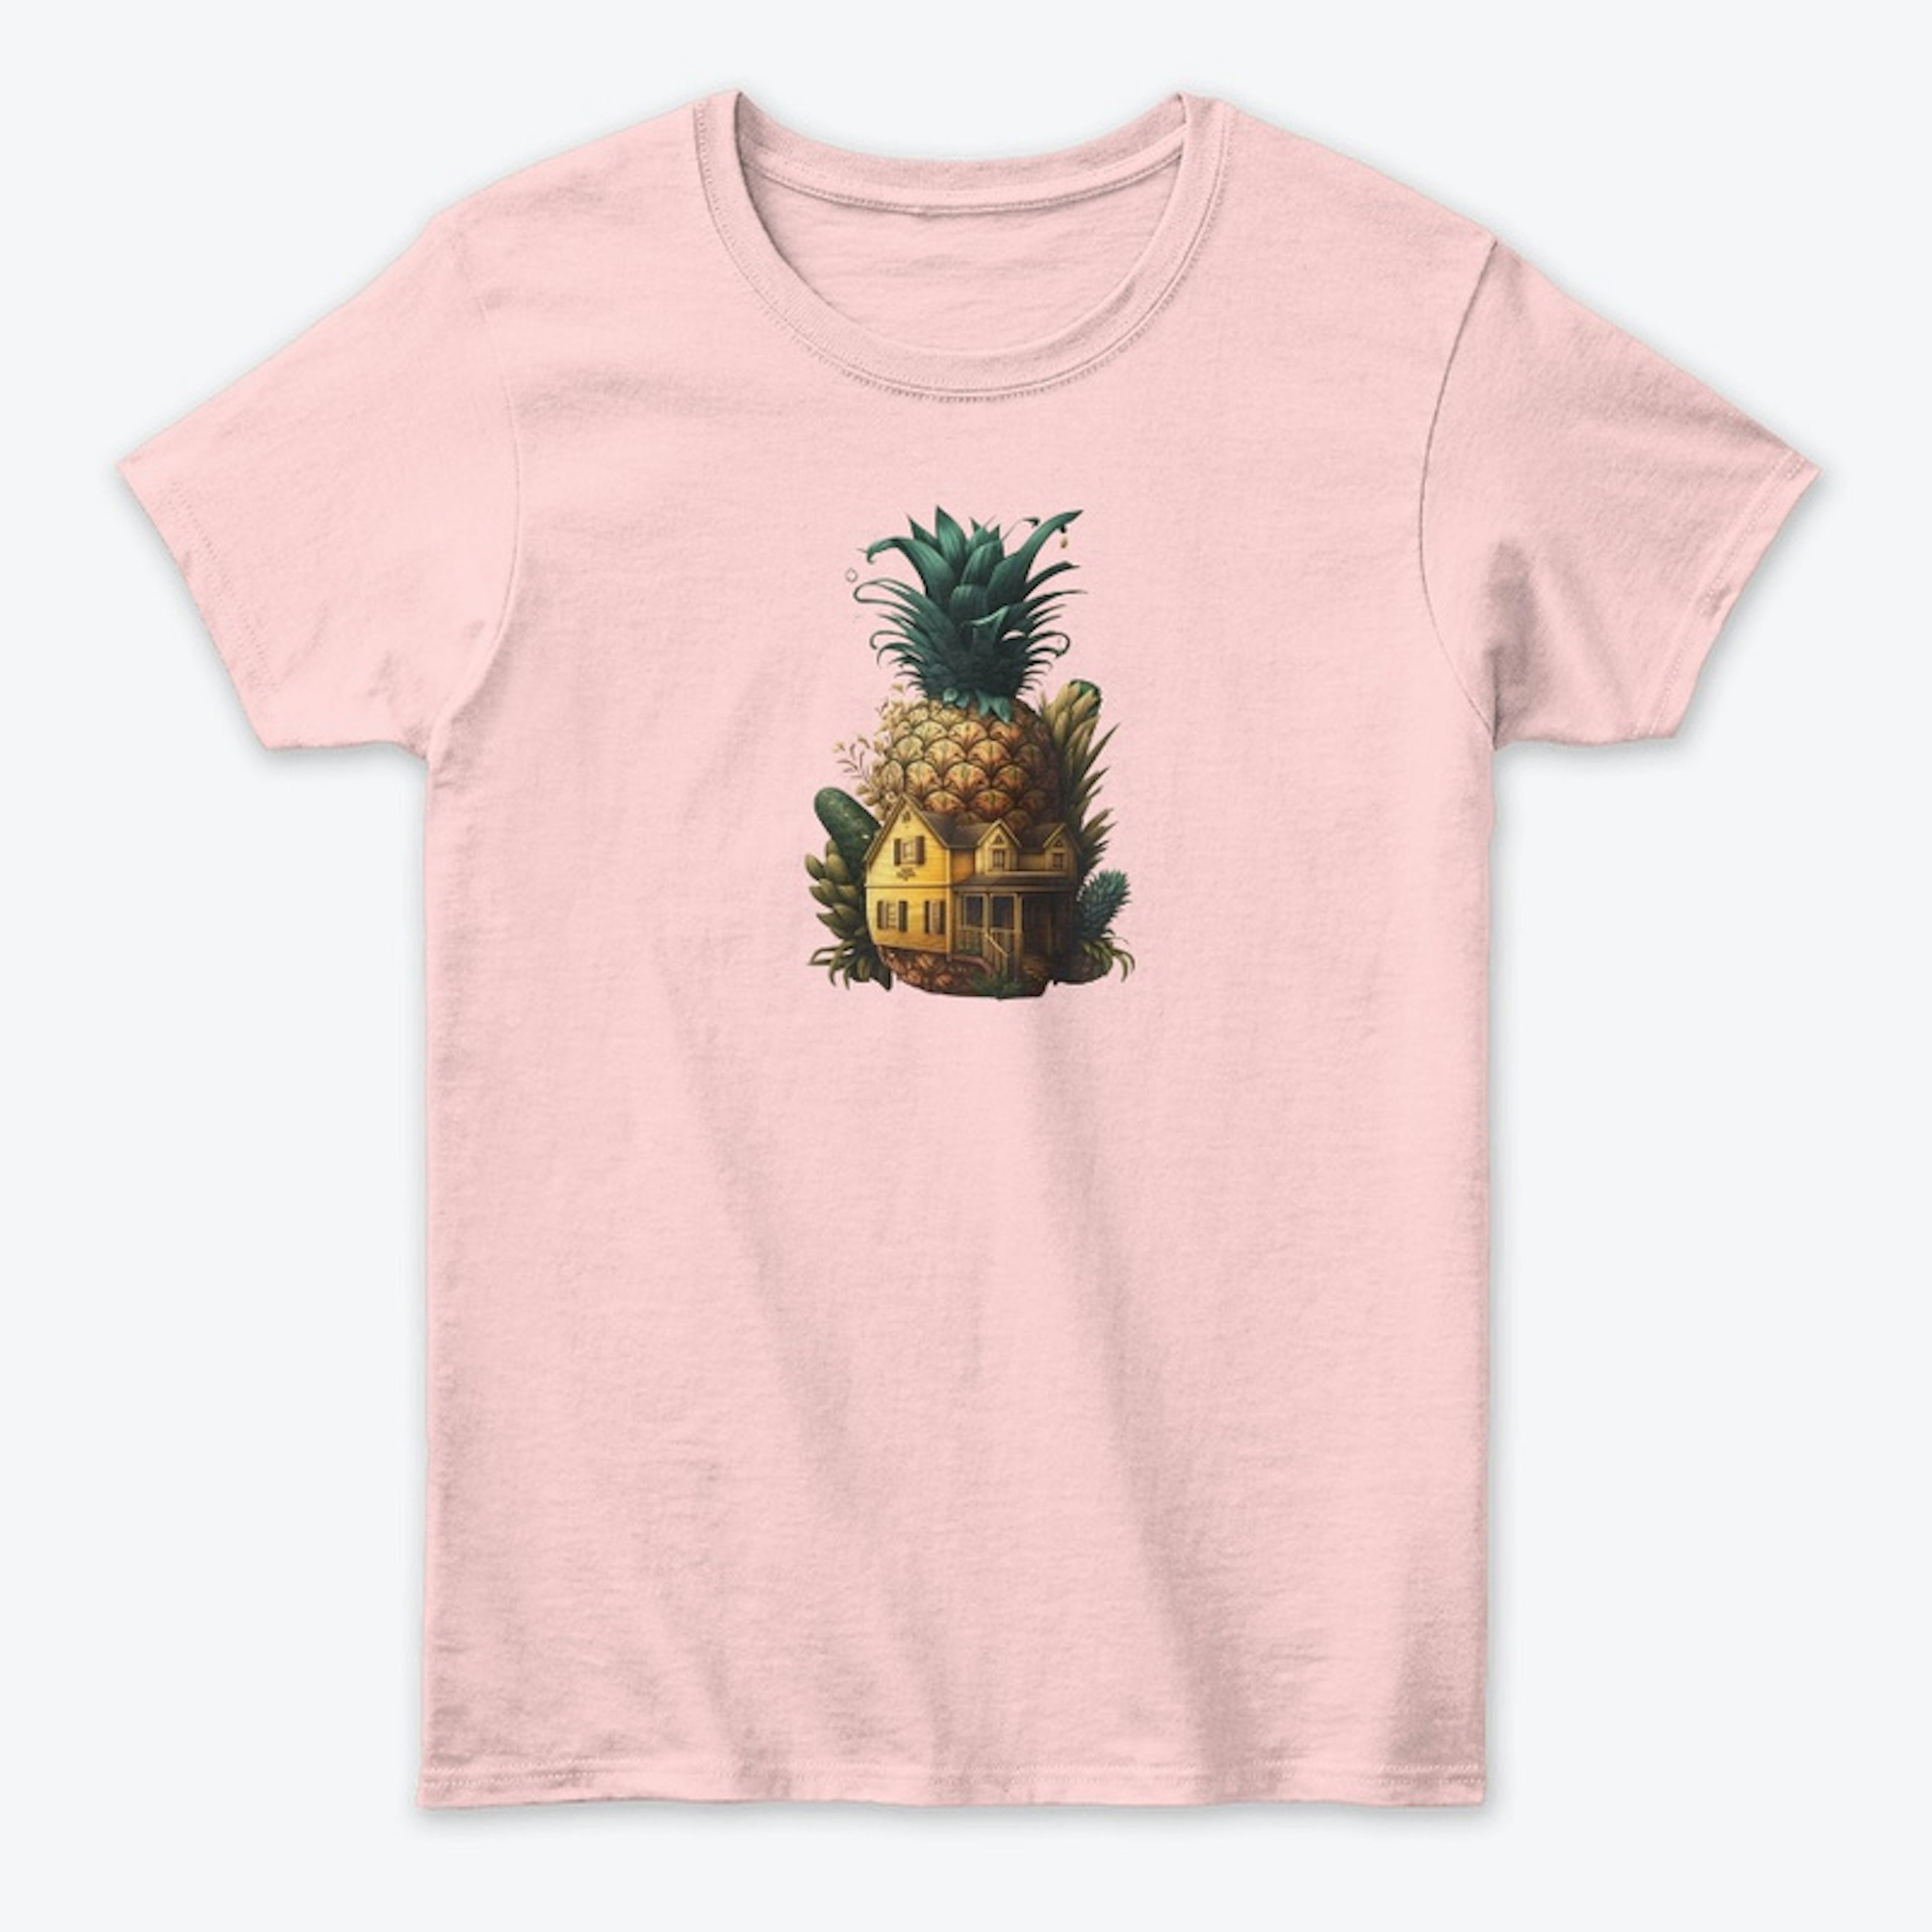 The Pineapple of Hospitality!